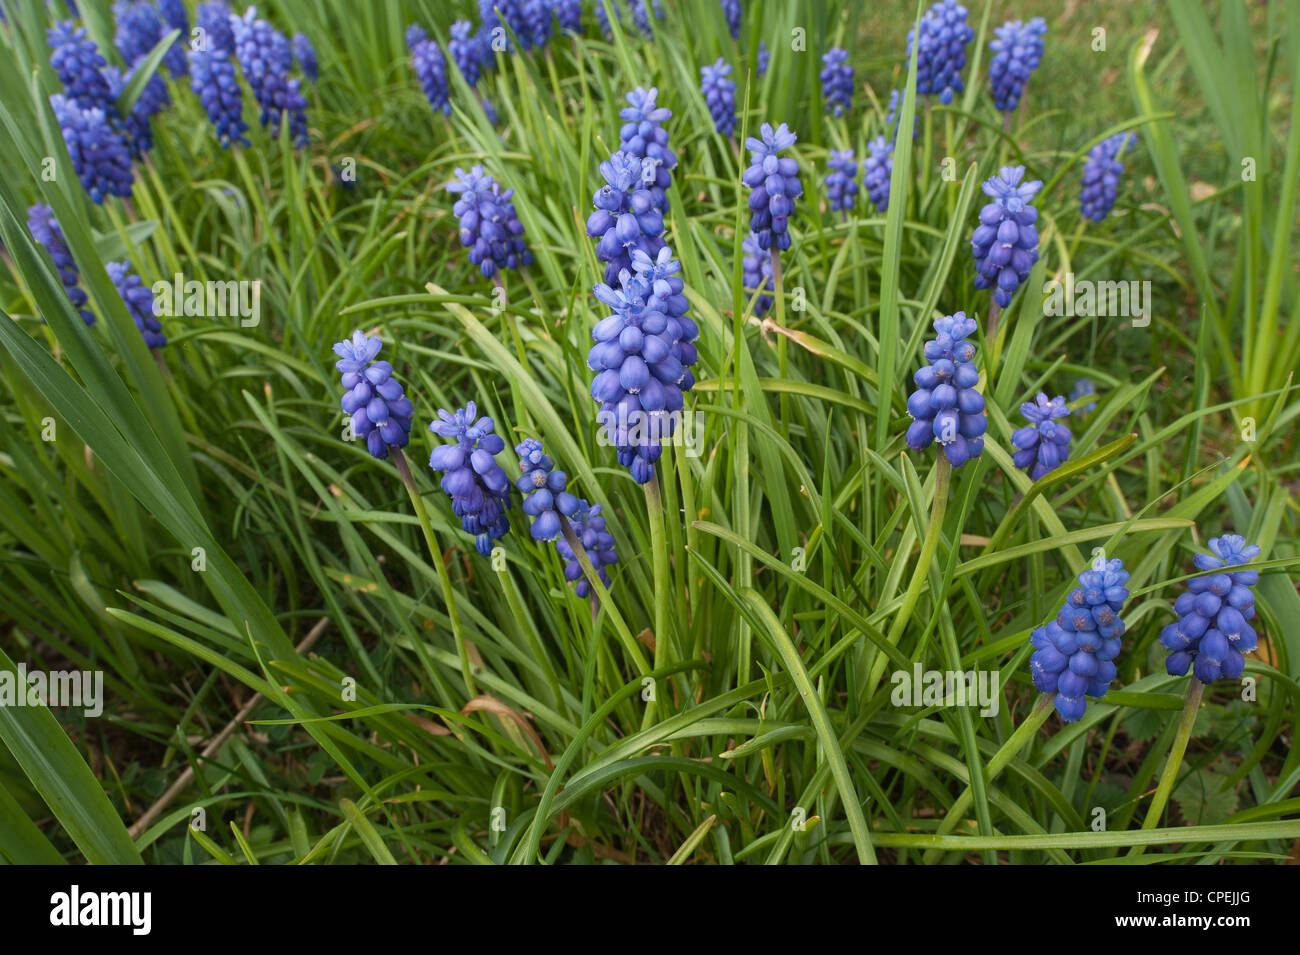 Small grape hyacinth flowering in Spring common grape hyacinth Muscari botryoides amongst germinating grass Stock Photo